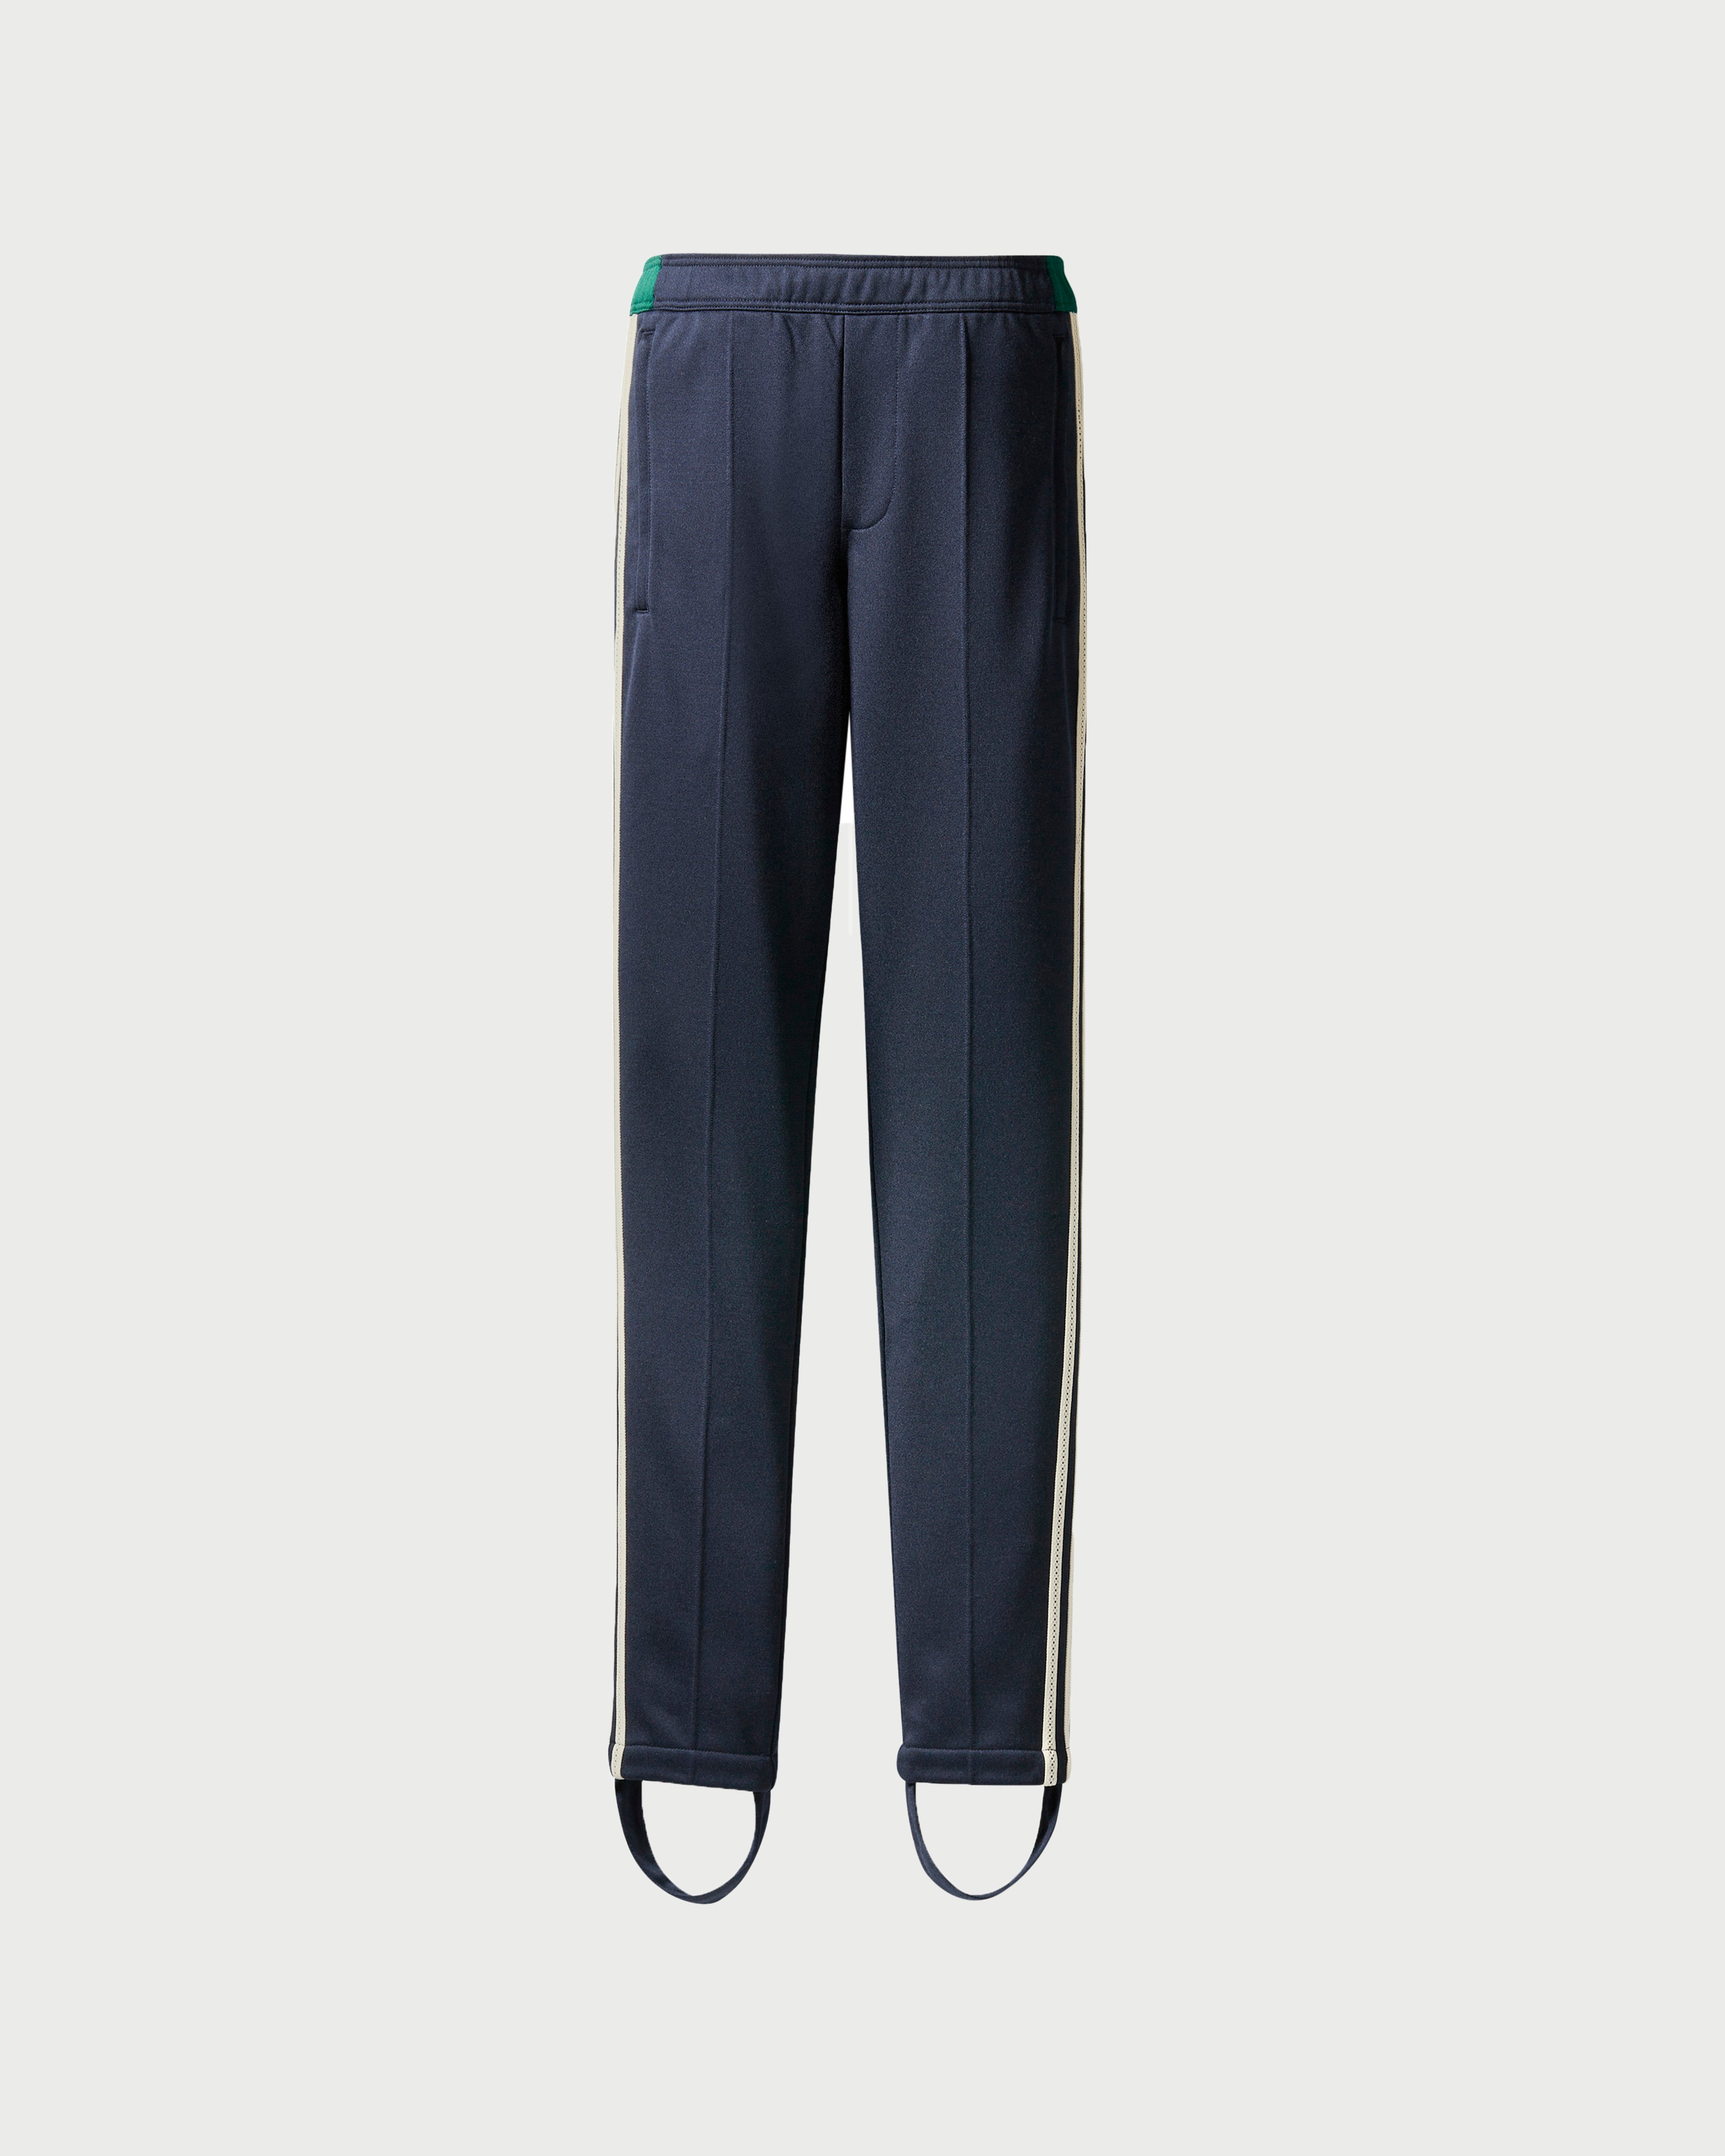 Adidas x Wales Bonner - Lovers Trousers Navy - Clothing - Blue - Image 1